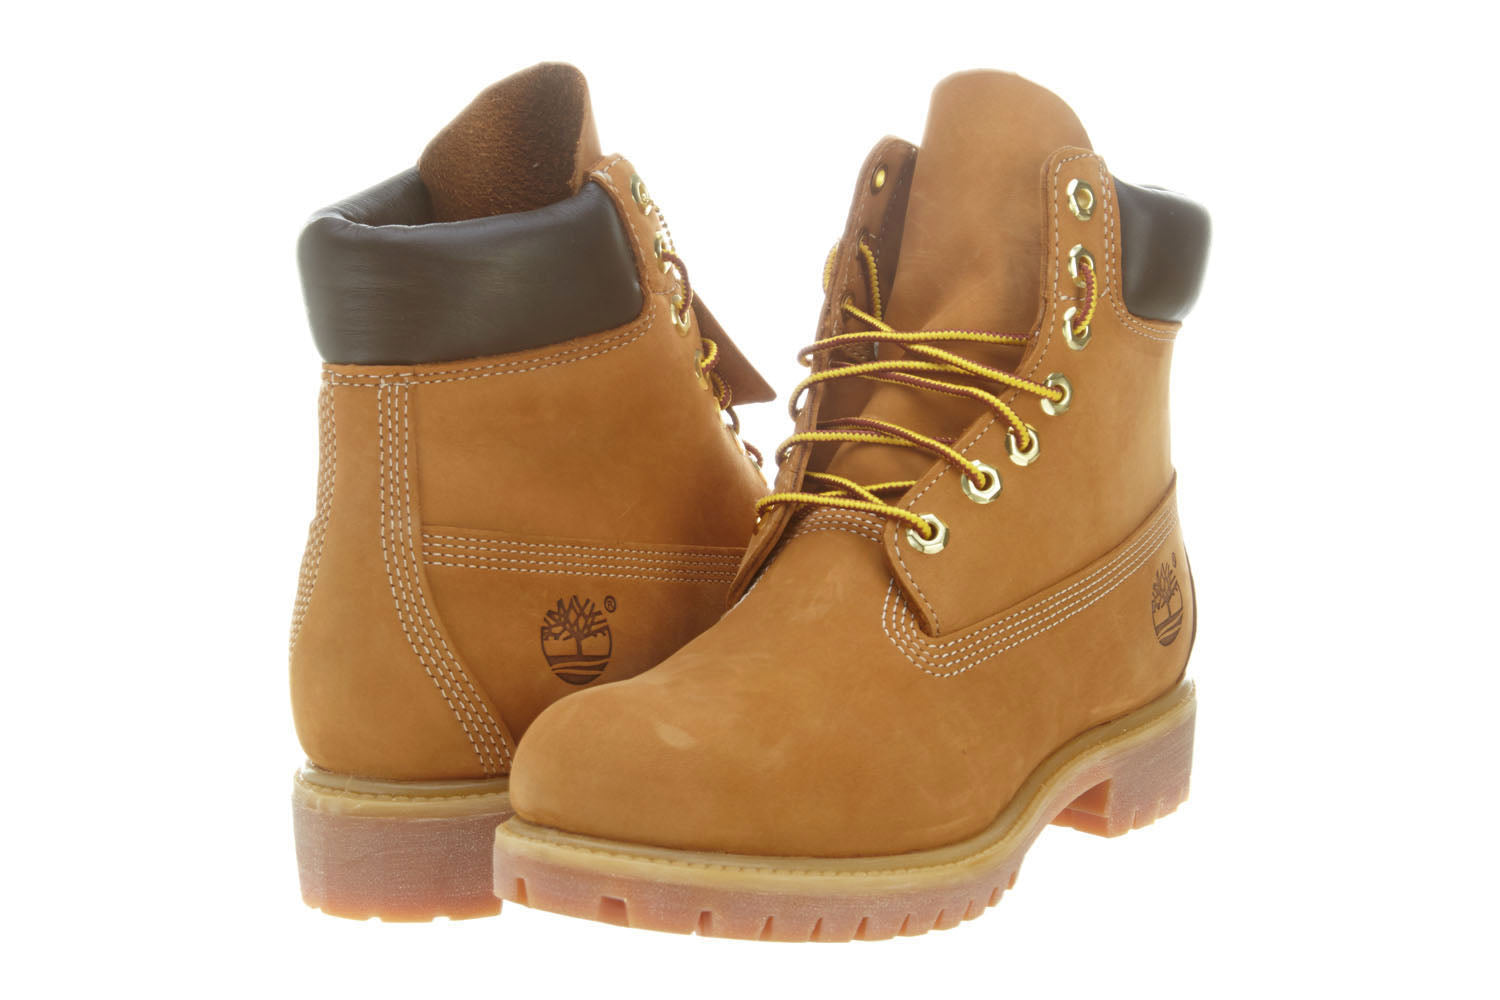 Timberland Classic 6 Inch Premium Mens Basic Waterproof Boots (Wide Width)